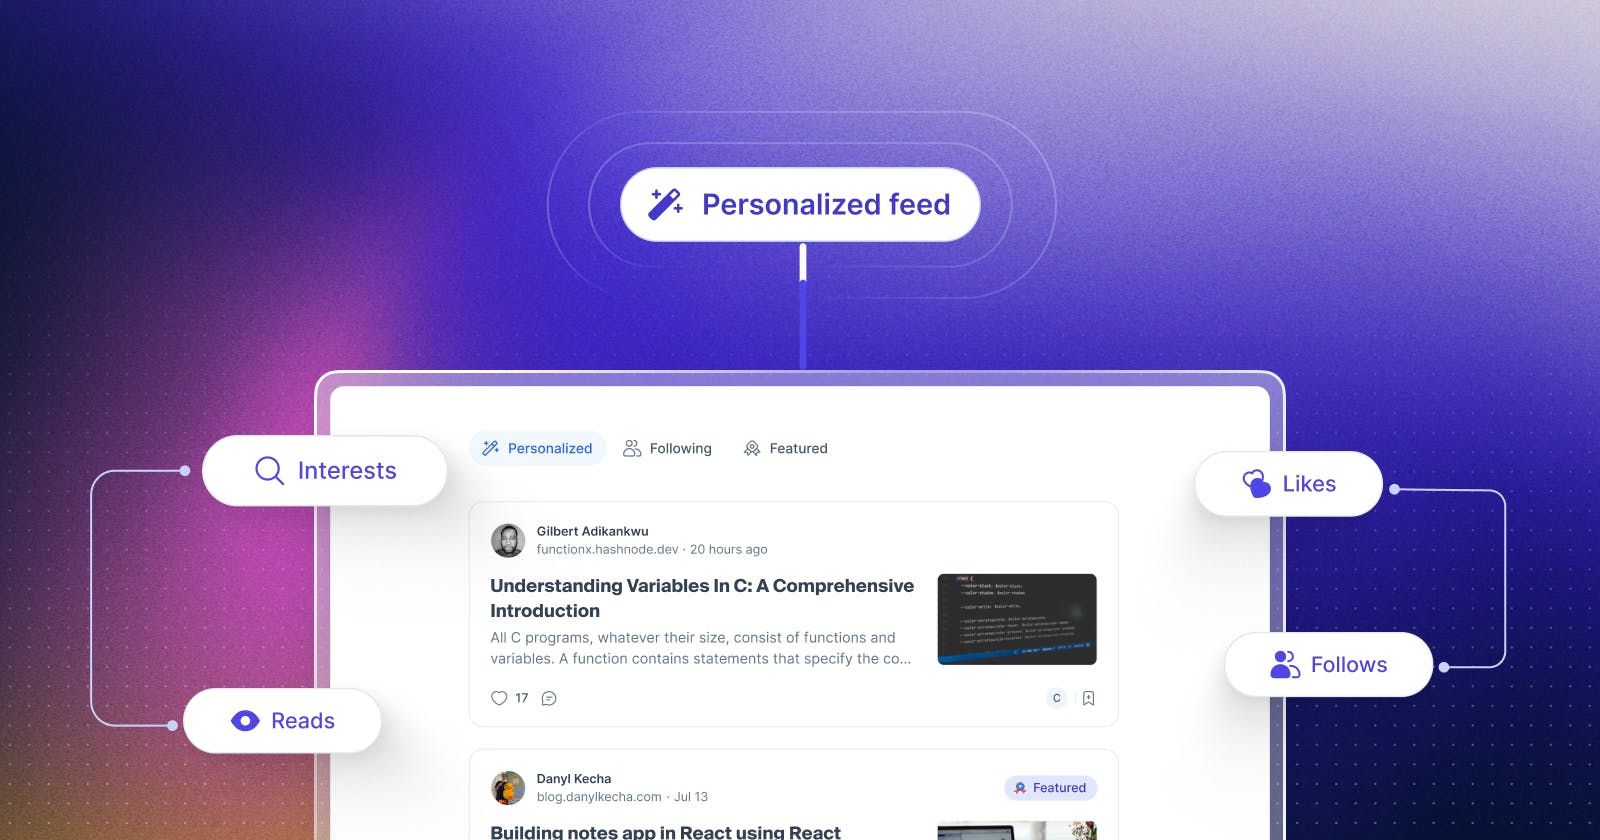 The journey behind Hashnode's new personalized feed